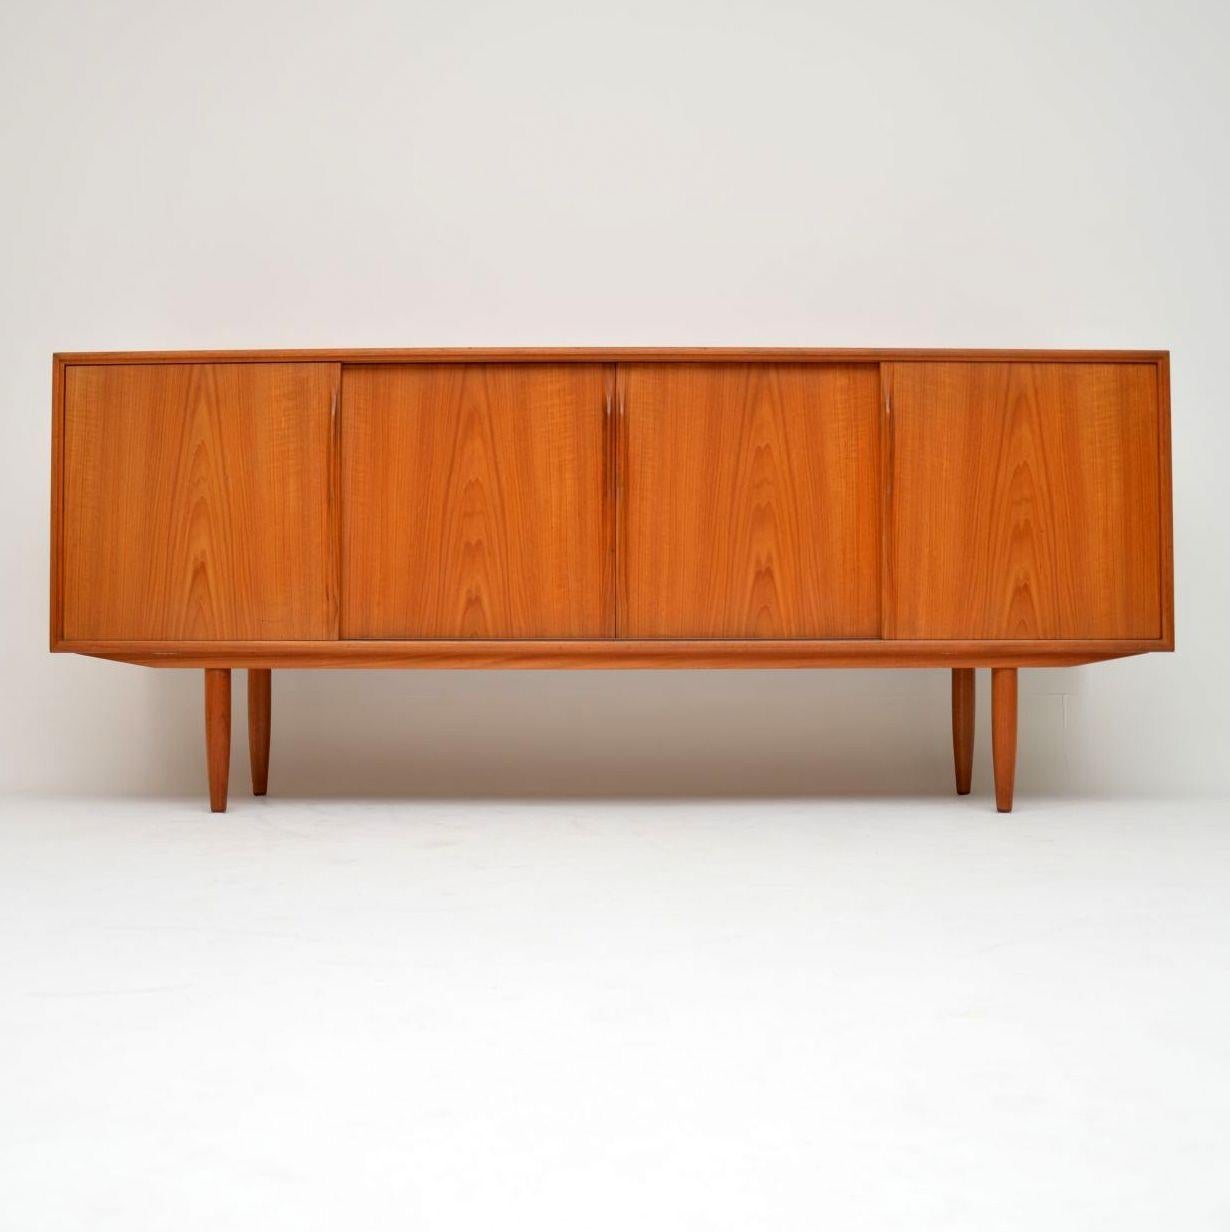 A super stylish and extremely well made vintage Danish sideboard in teak, this was designed by Gunni Omann for Omann Junior. It was made in Denmark during the 1960s, and is in superb condition for its age. It came out of a private London house, the